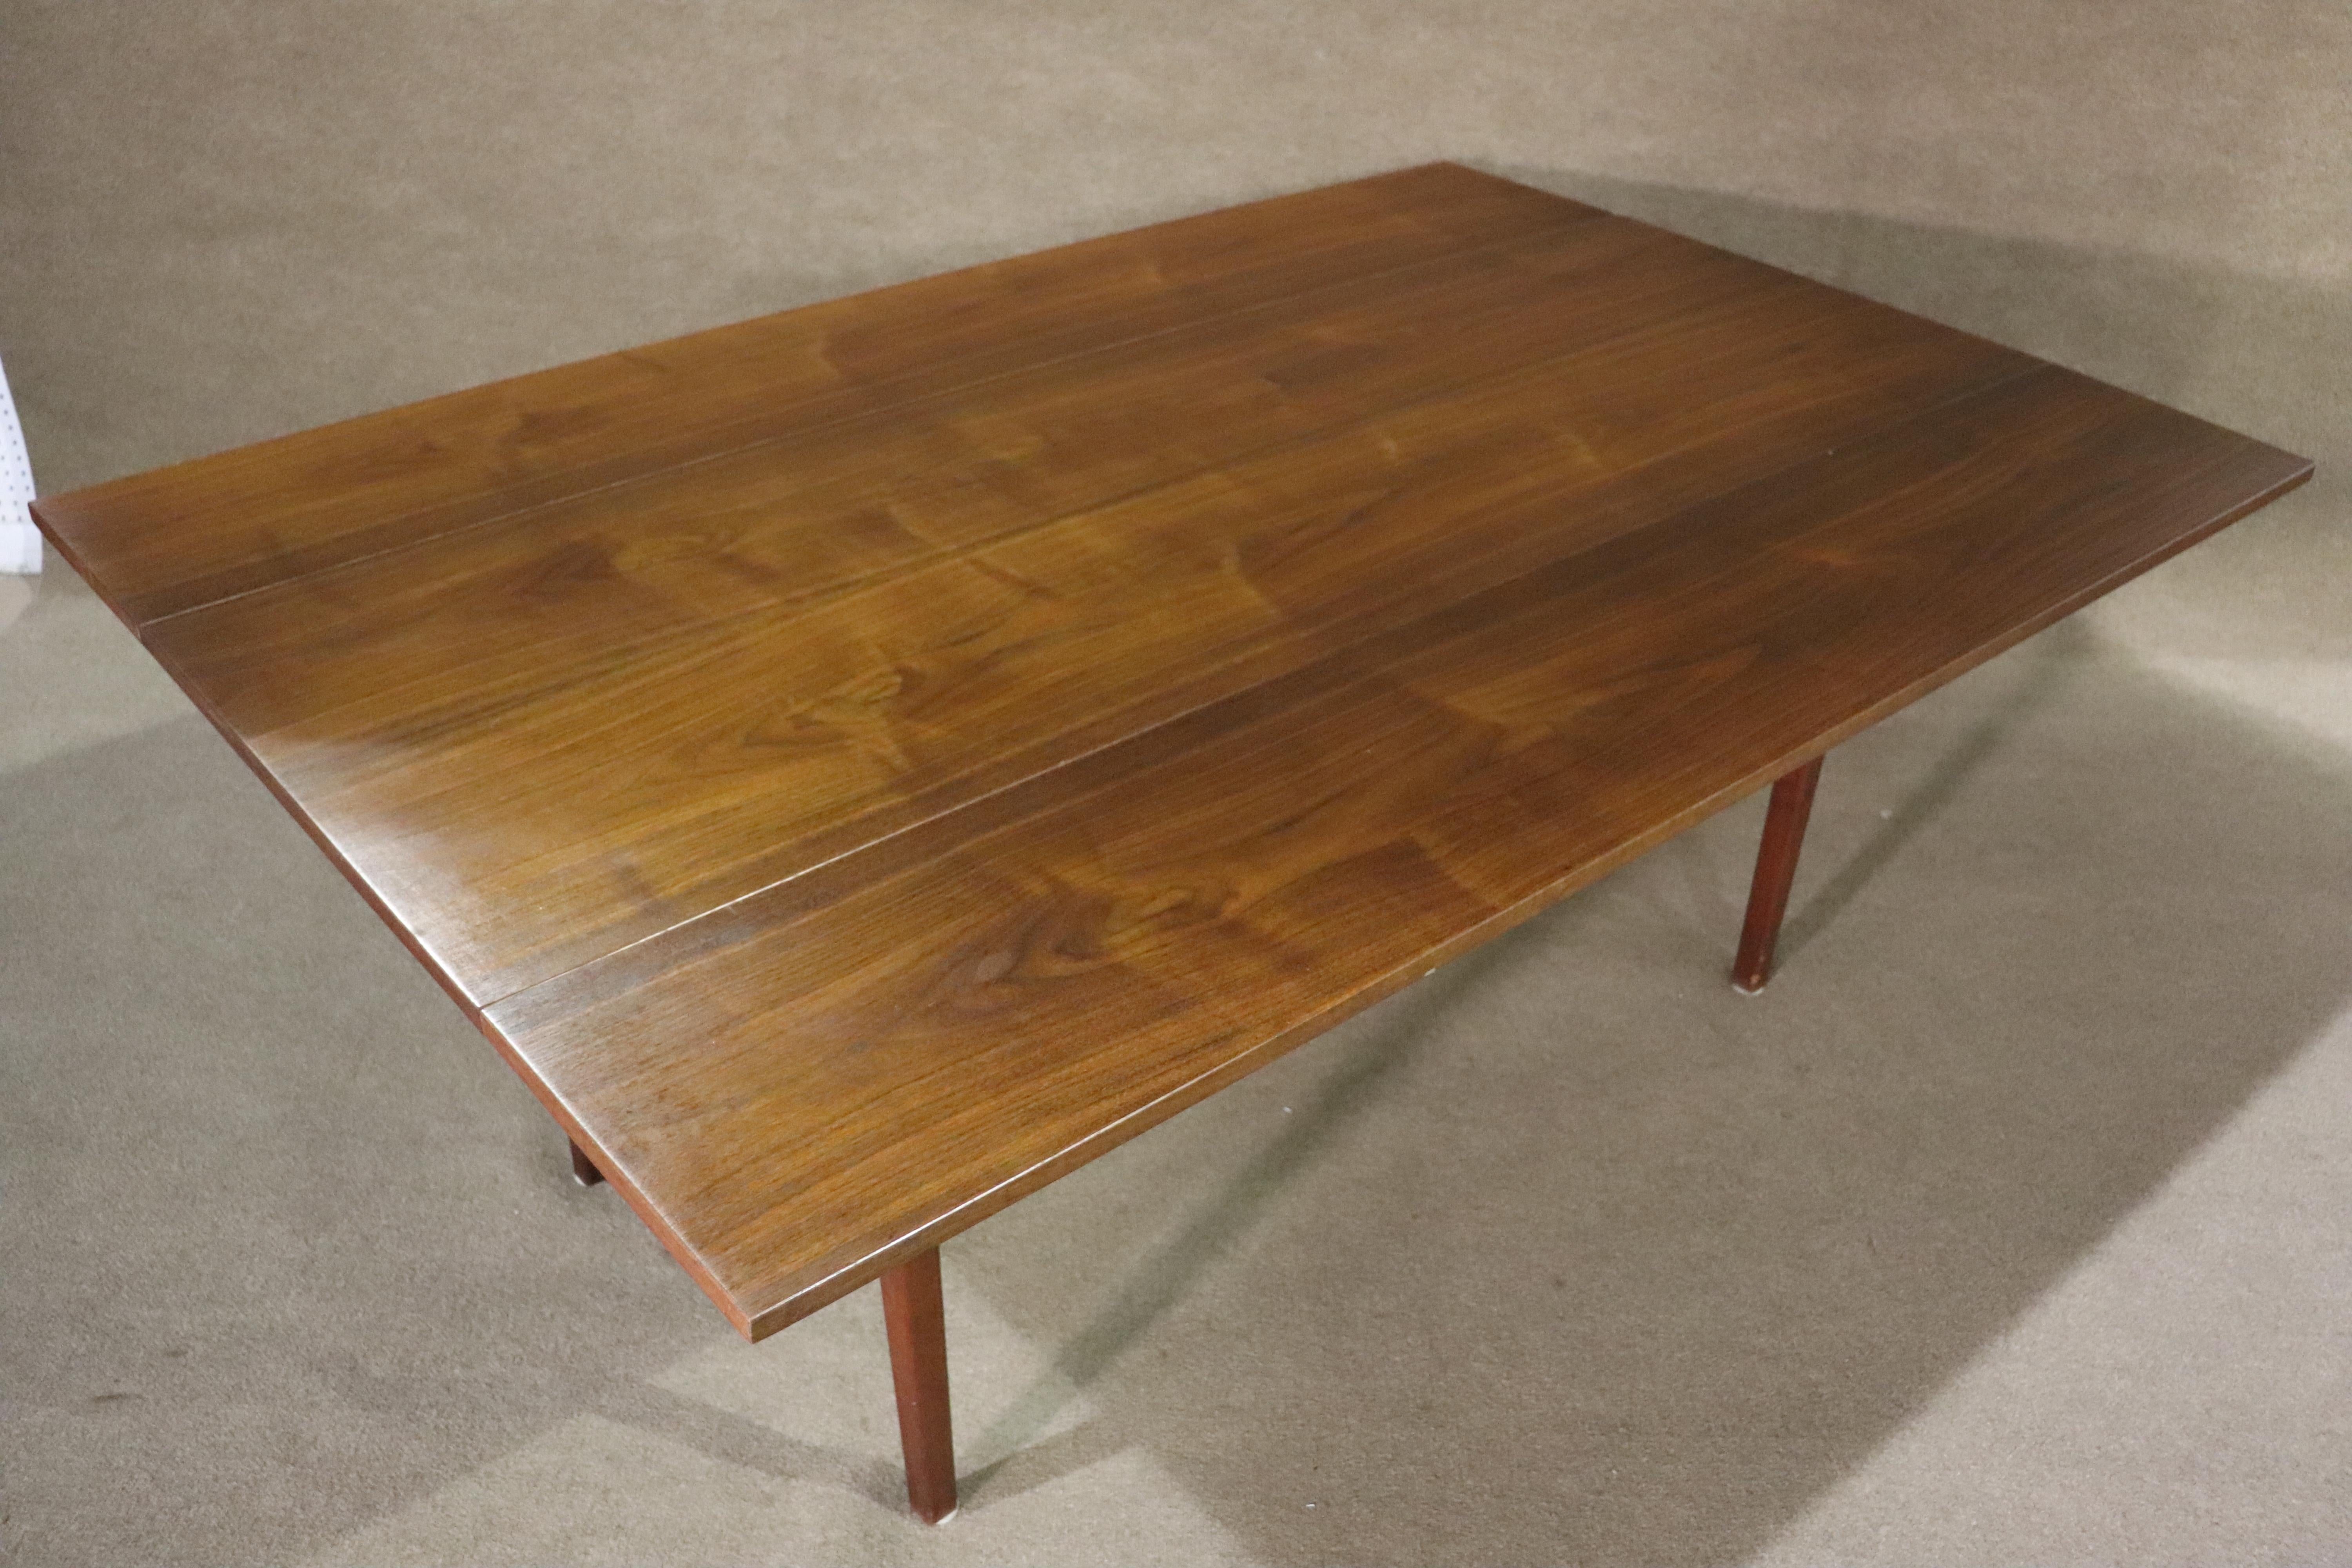 Long mid-century table with two 12 inch leaves that fold down to convert to a entry or sofa console. Warm walnut grain throughout with slim tapered legs.
Please confirm location NY or NJ